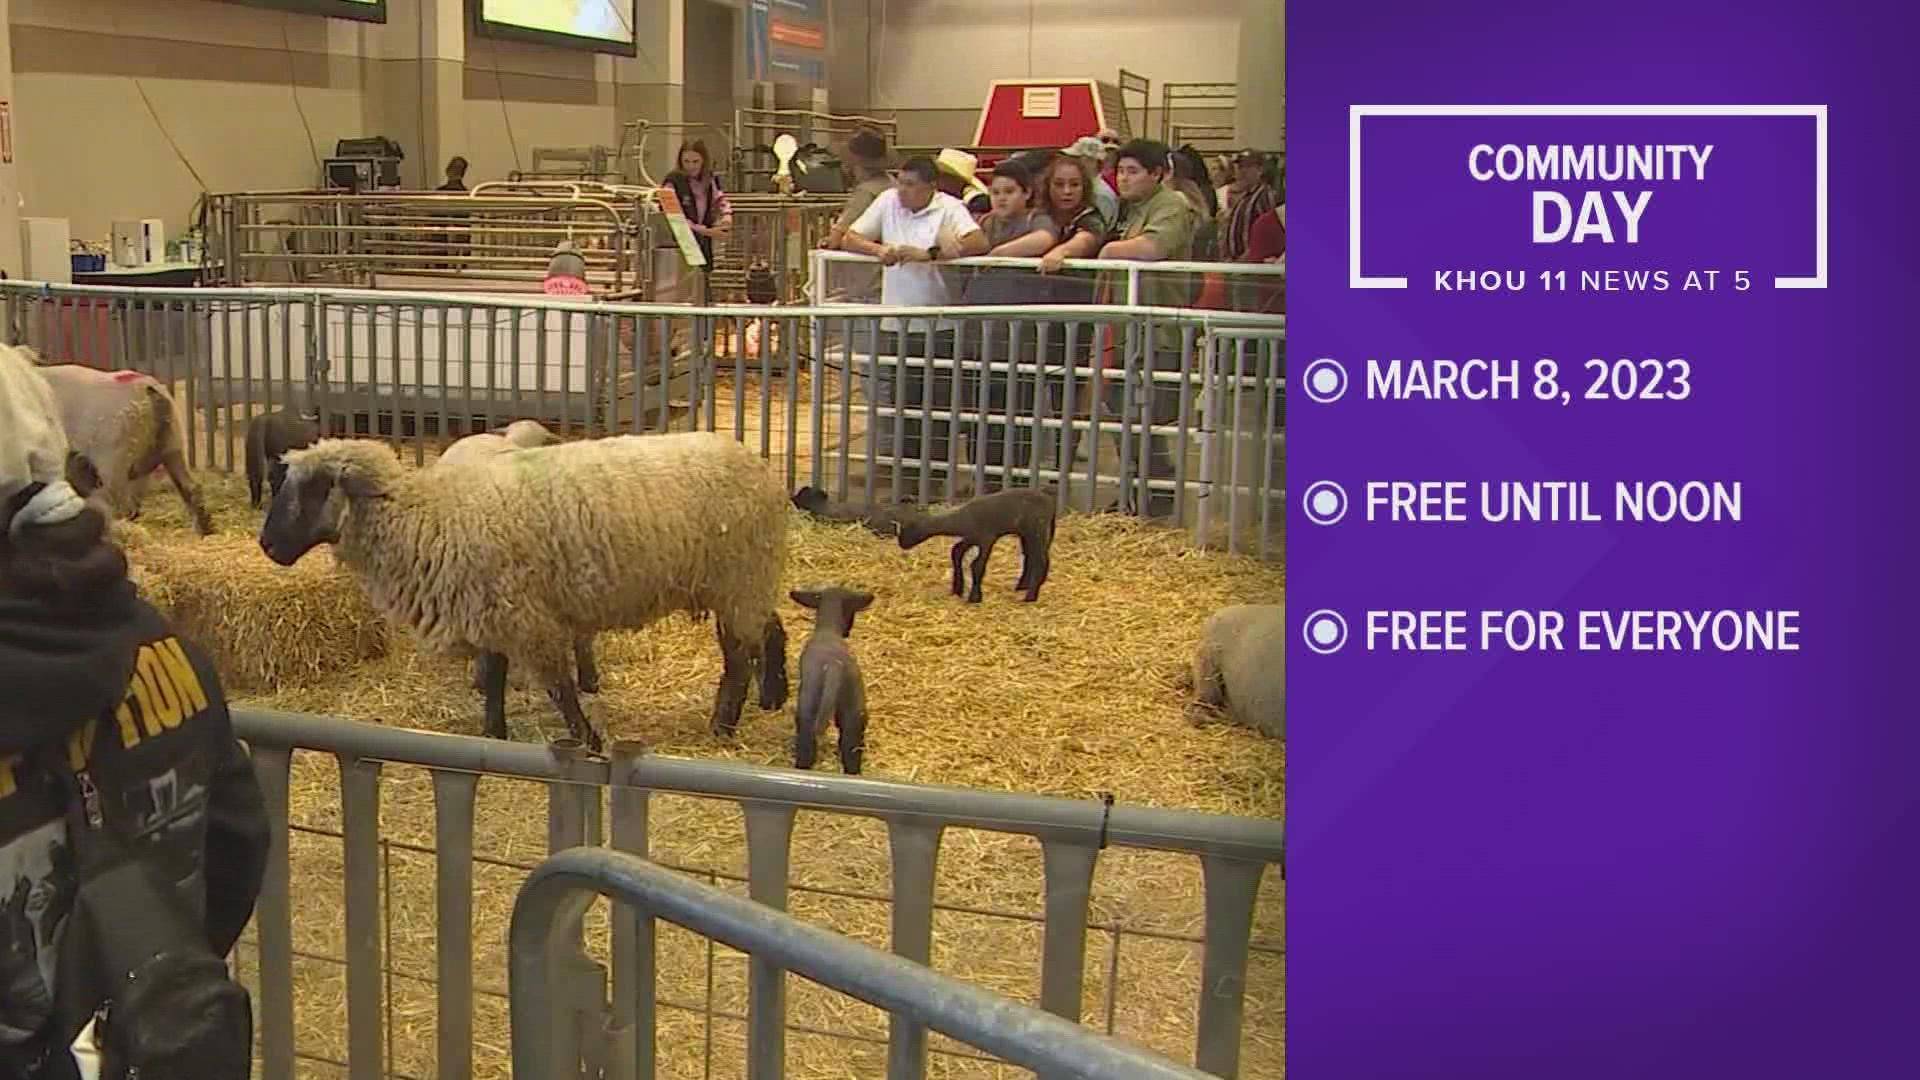 The free admission will be for grounds tickets, which include entrance to the carnival, the Livestock Show and all of the attractions inside NRG Center & NRG Arena.